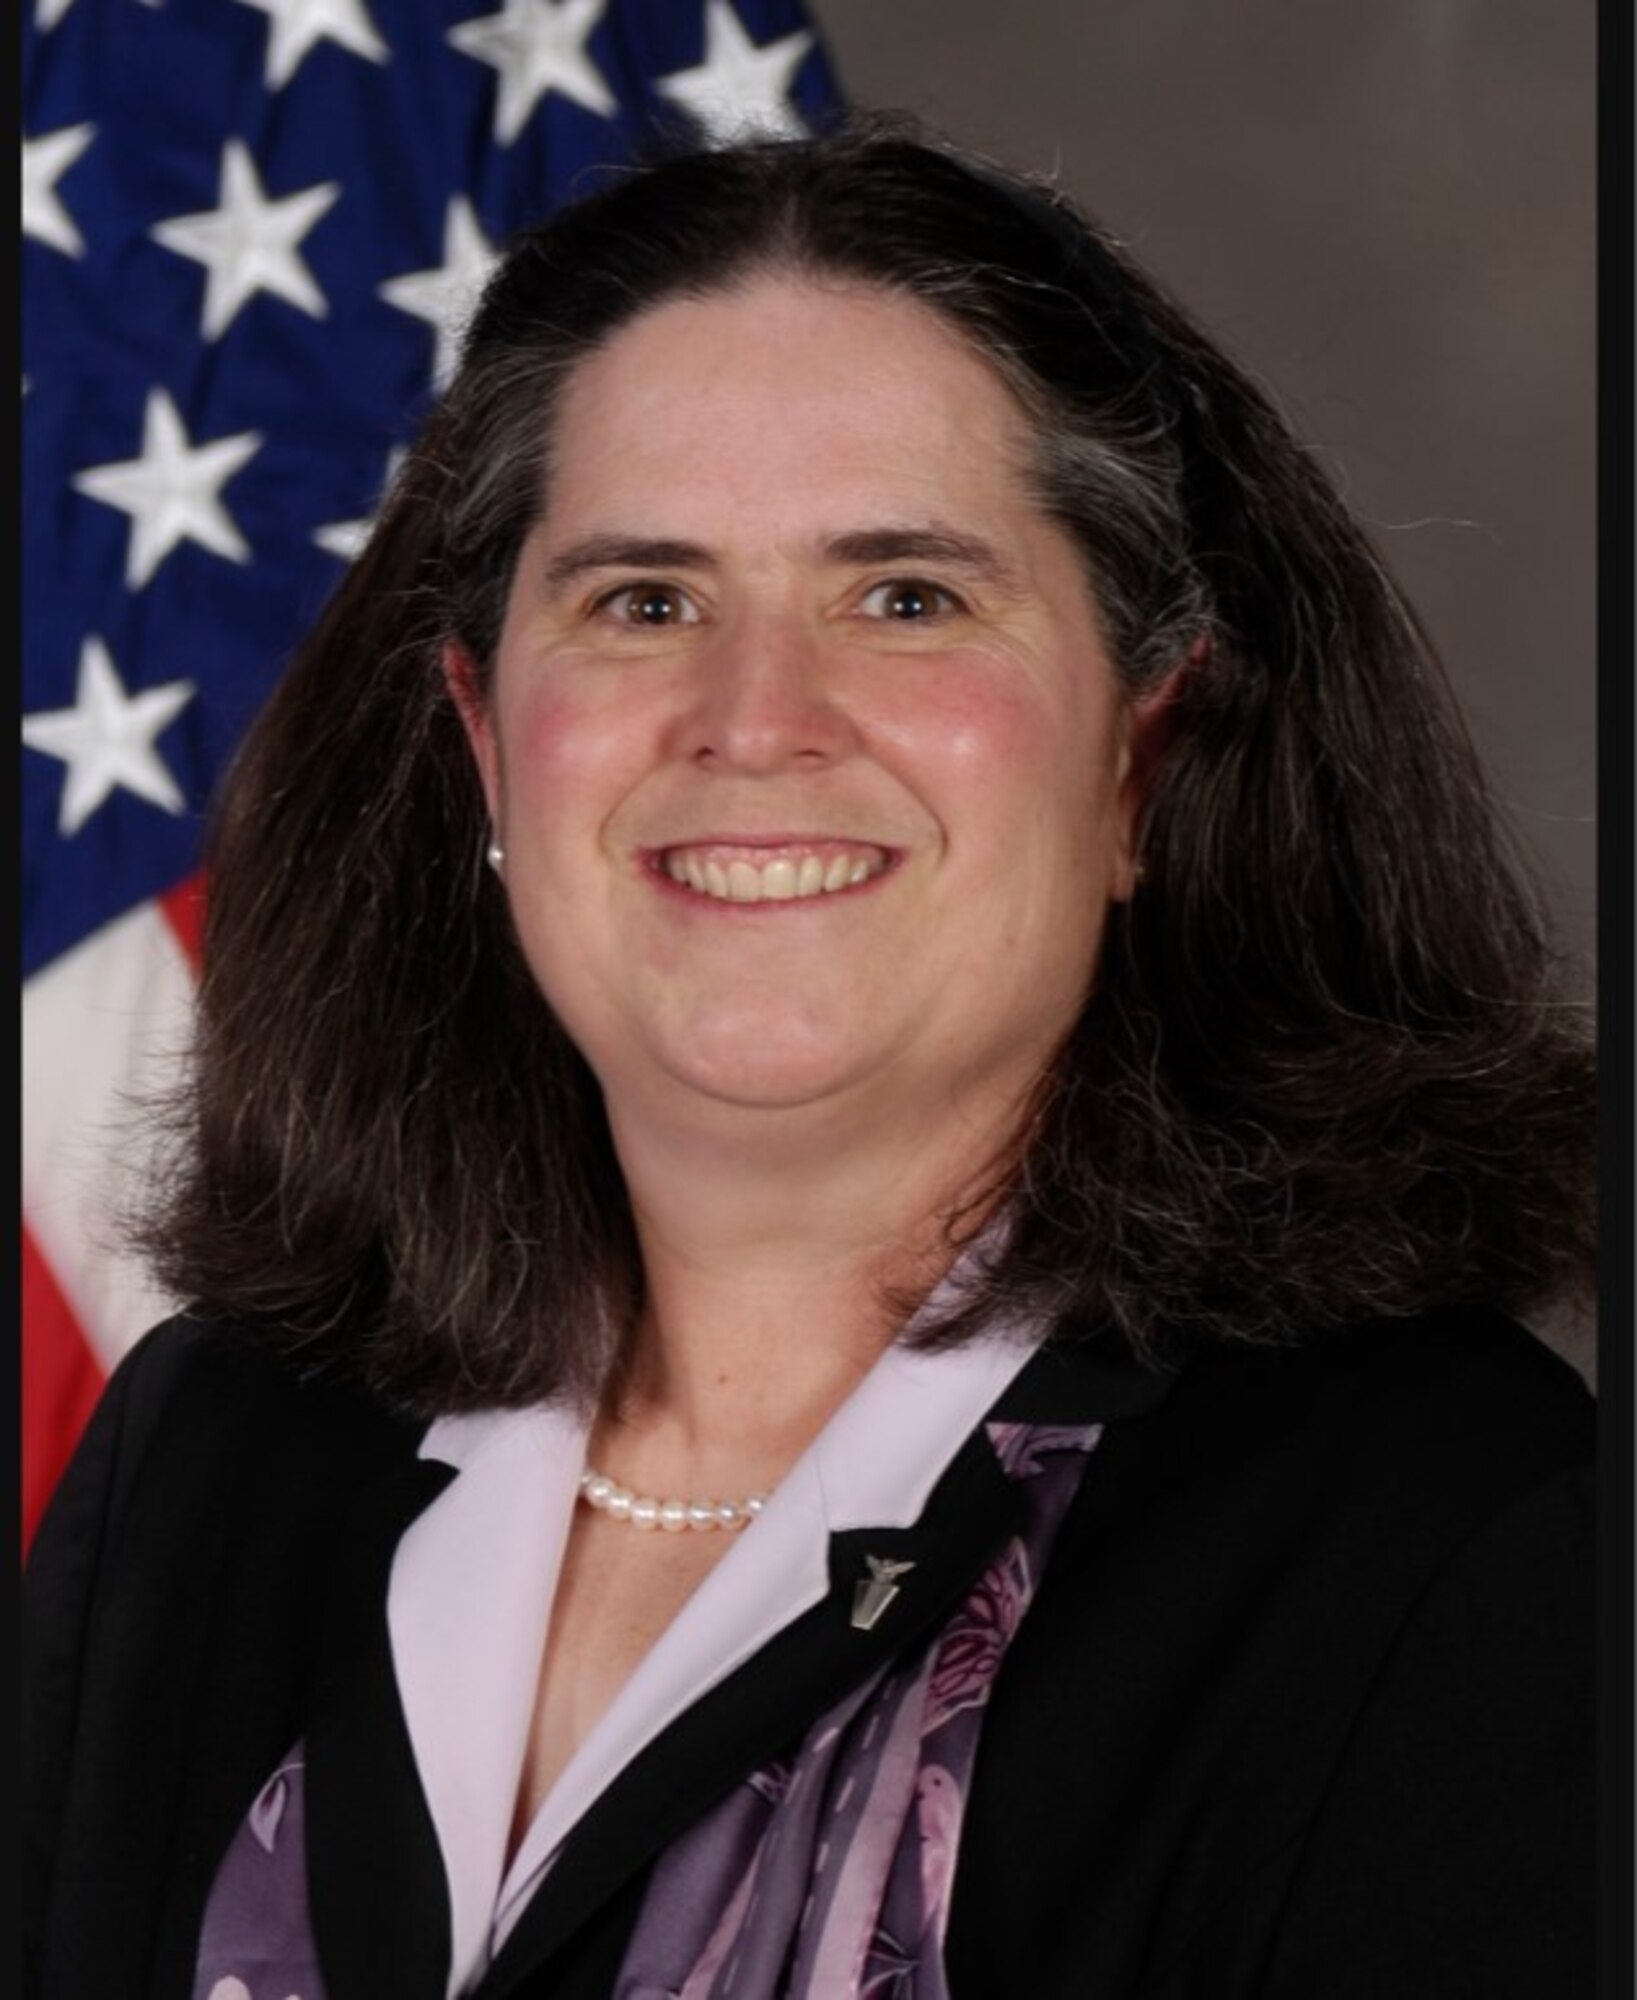 Heidi H. Bullock is a member of the Senior Executive Service, the Director of Contracting at Headquarters Air Force Materiel Command, Wright-Patterson Air Force Base.